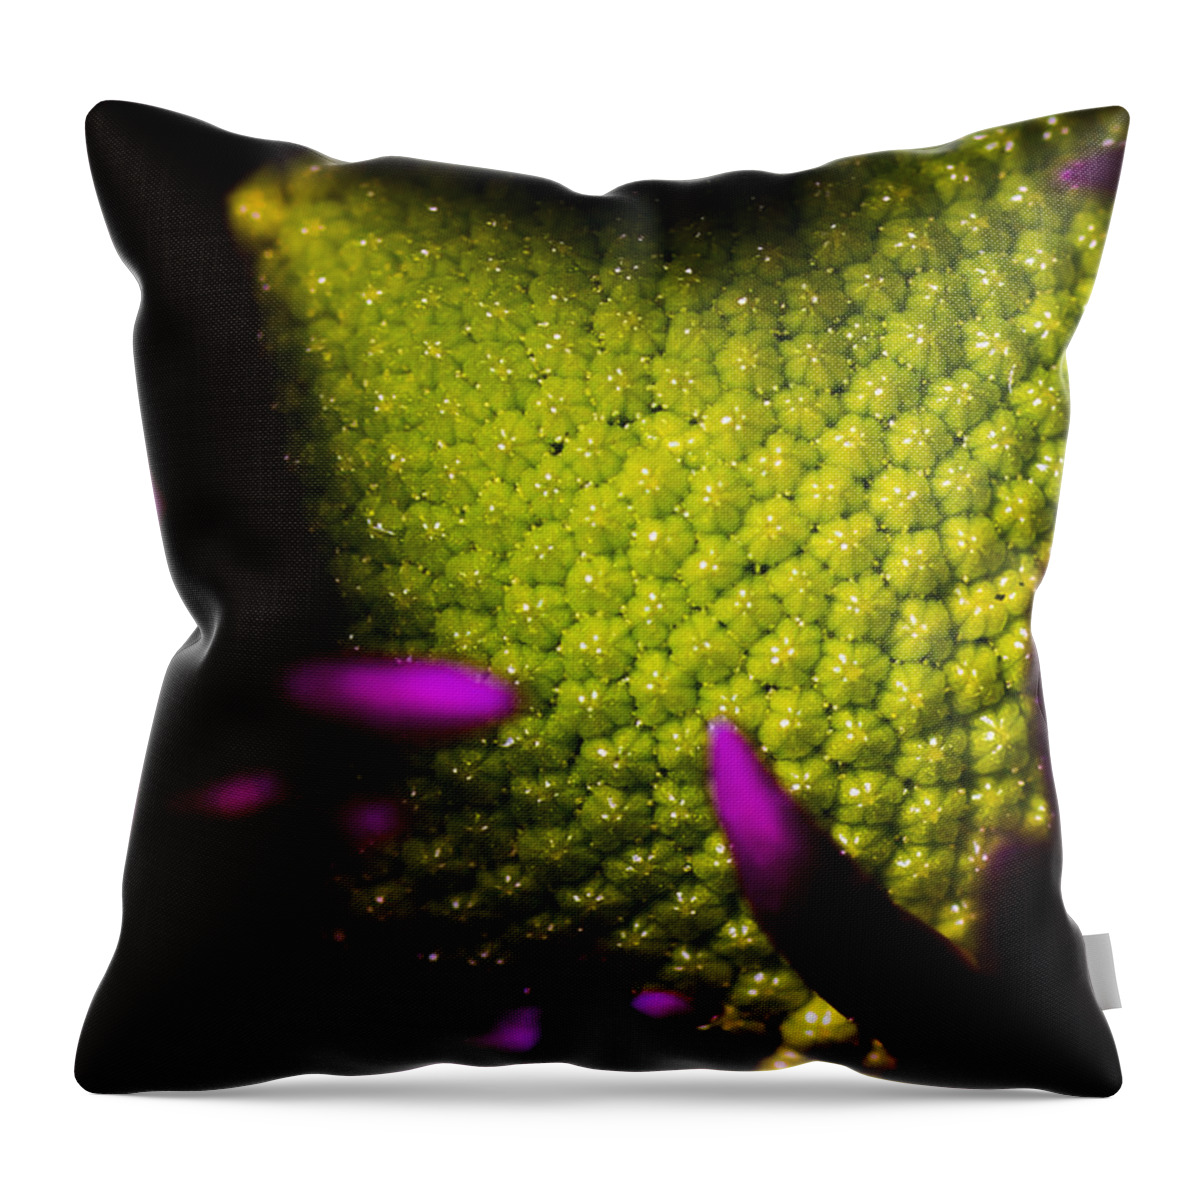 Abstract Throw Pillow featuring the photograph The World Within by Robert McKay Jones